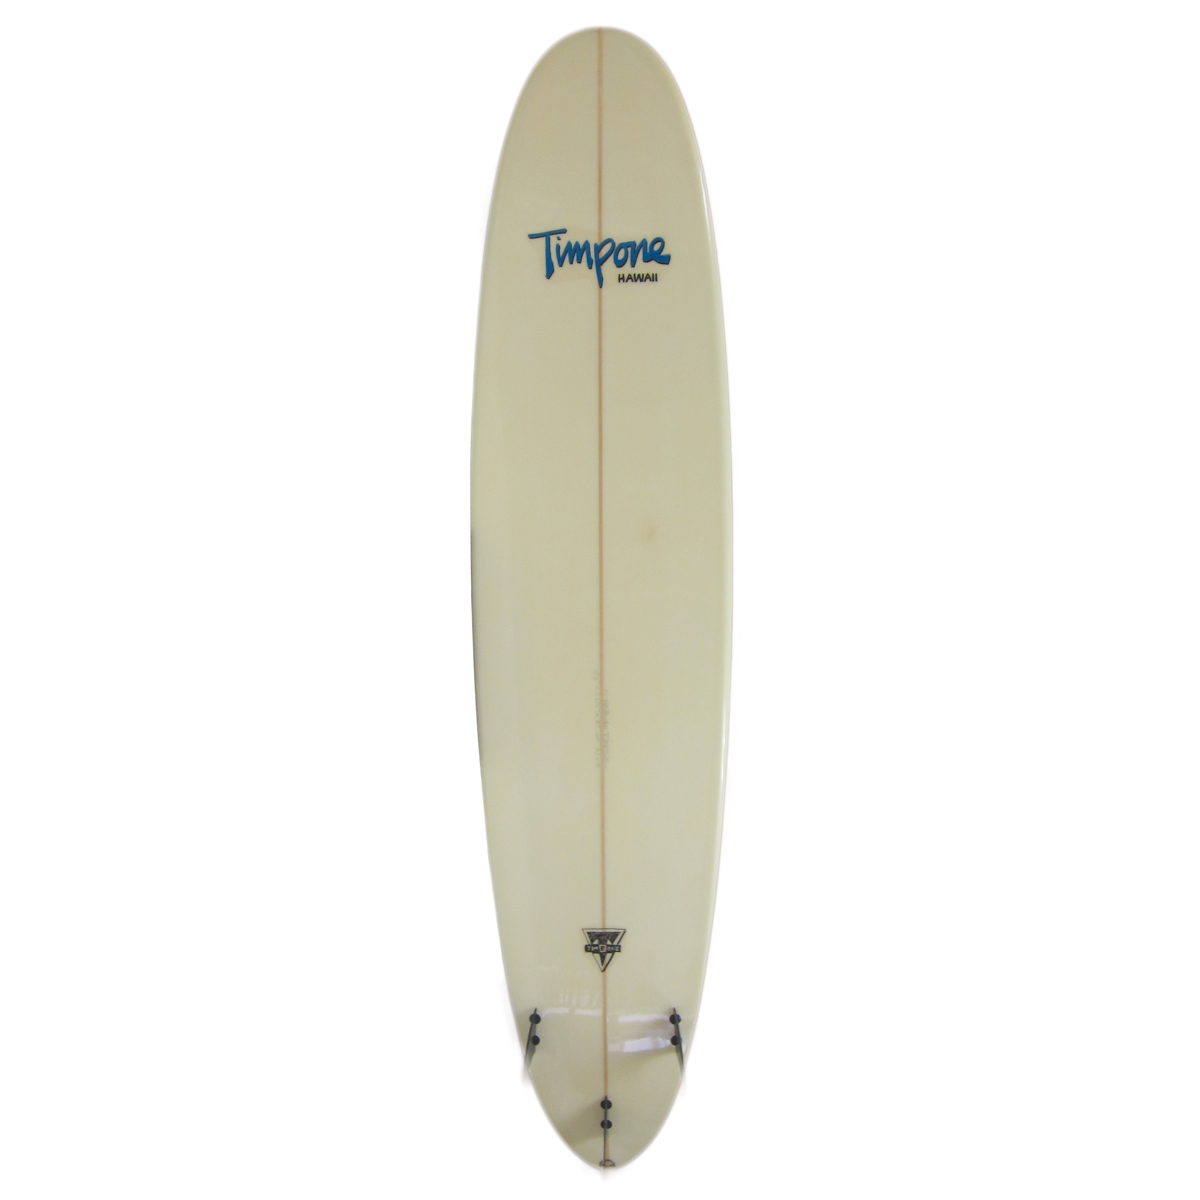 TIMPONE SURFBOARDS / 8`6 Mini Custom Shaped By TIMPNE